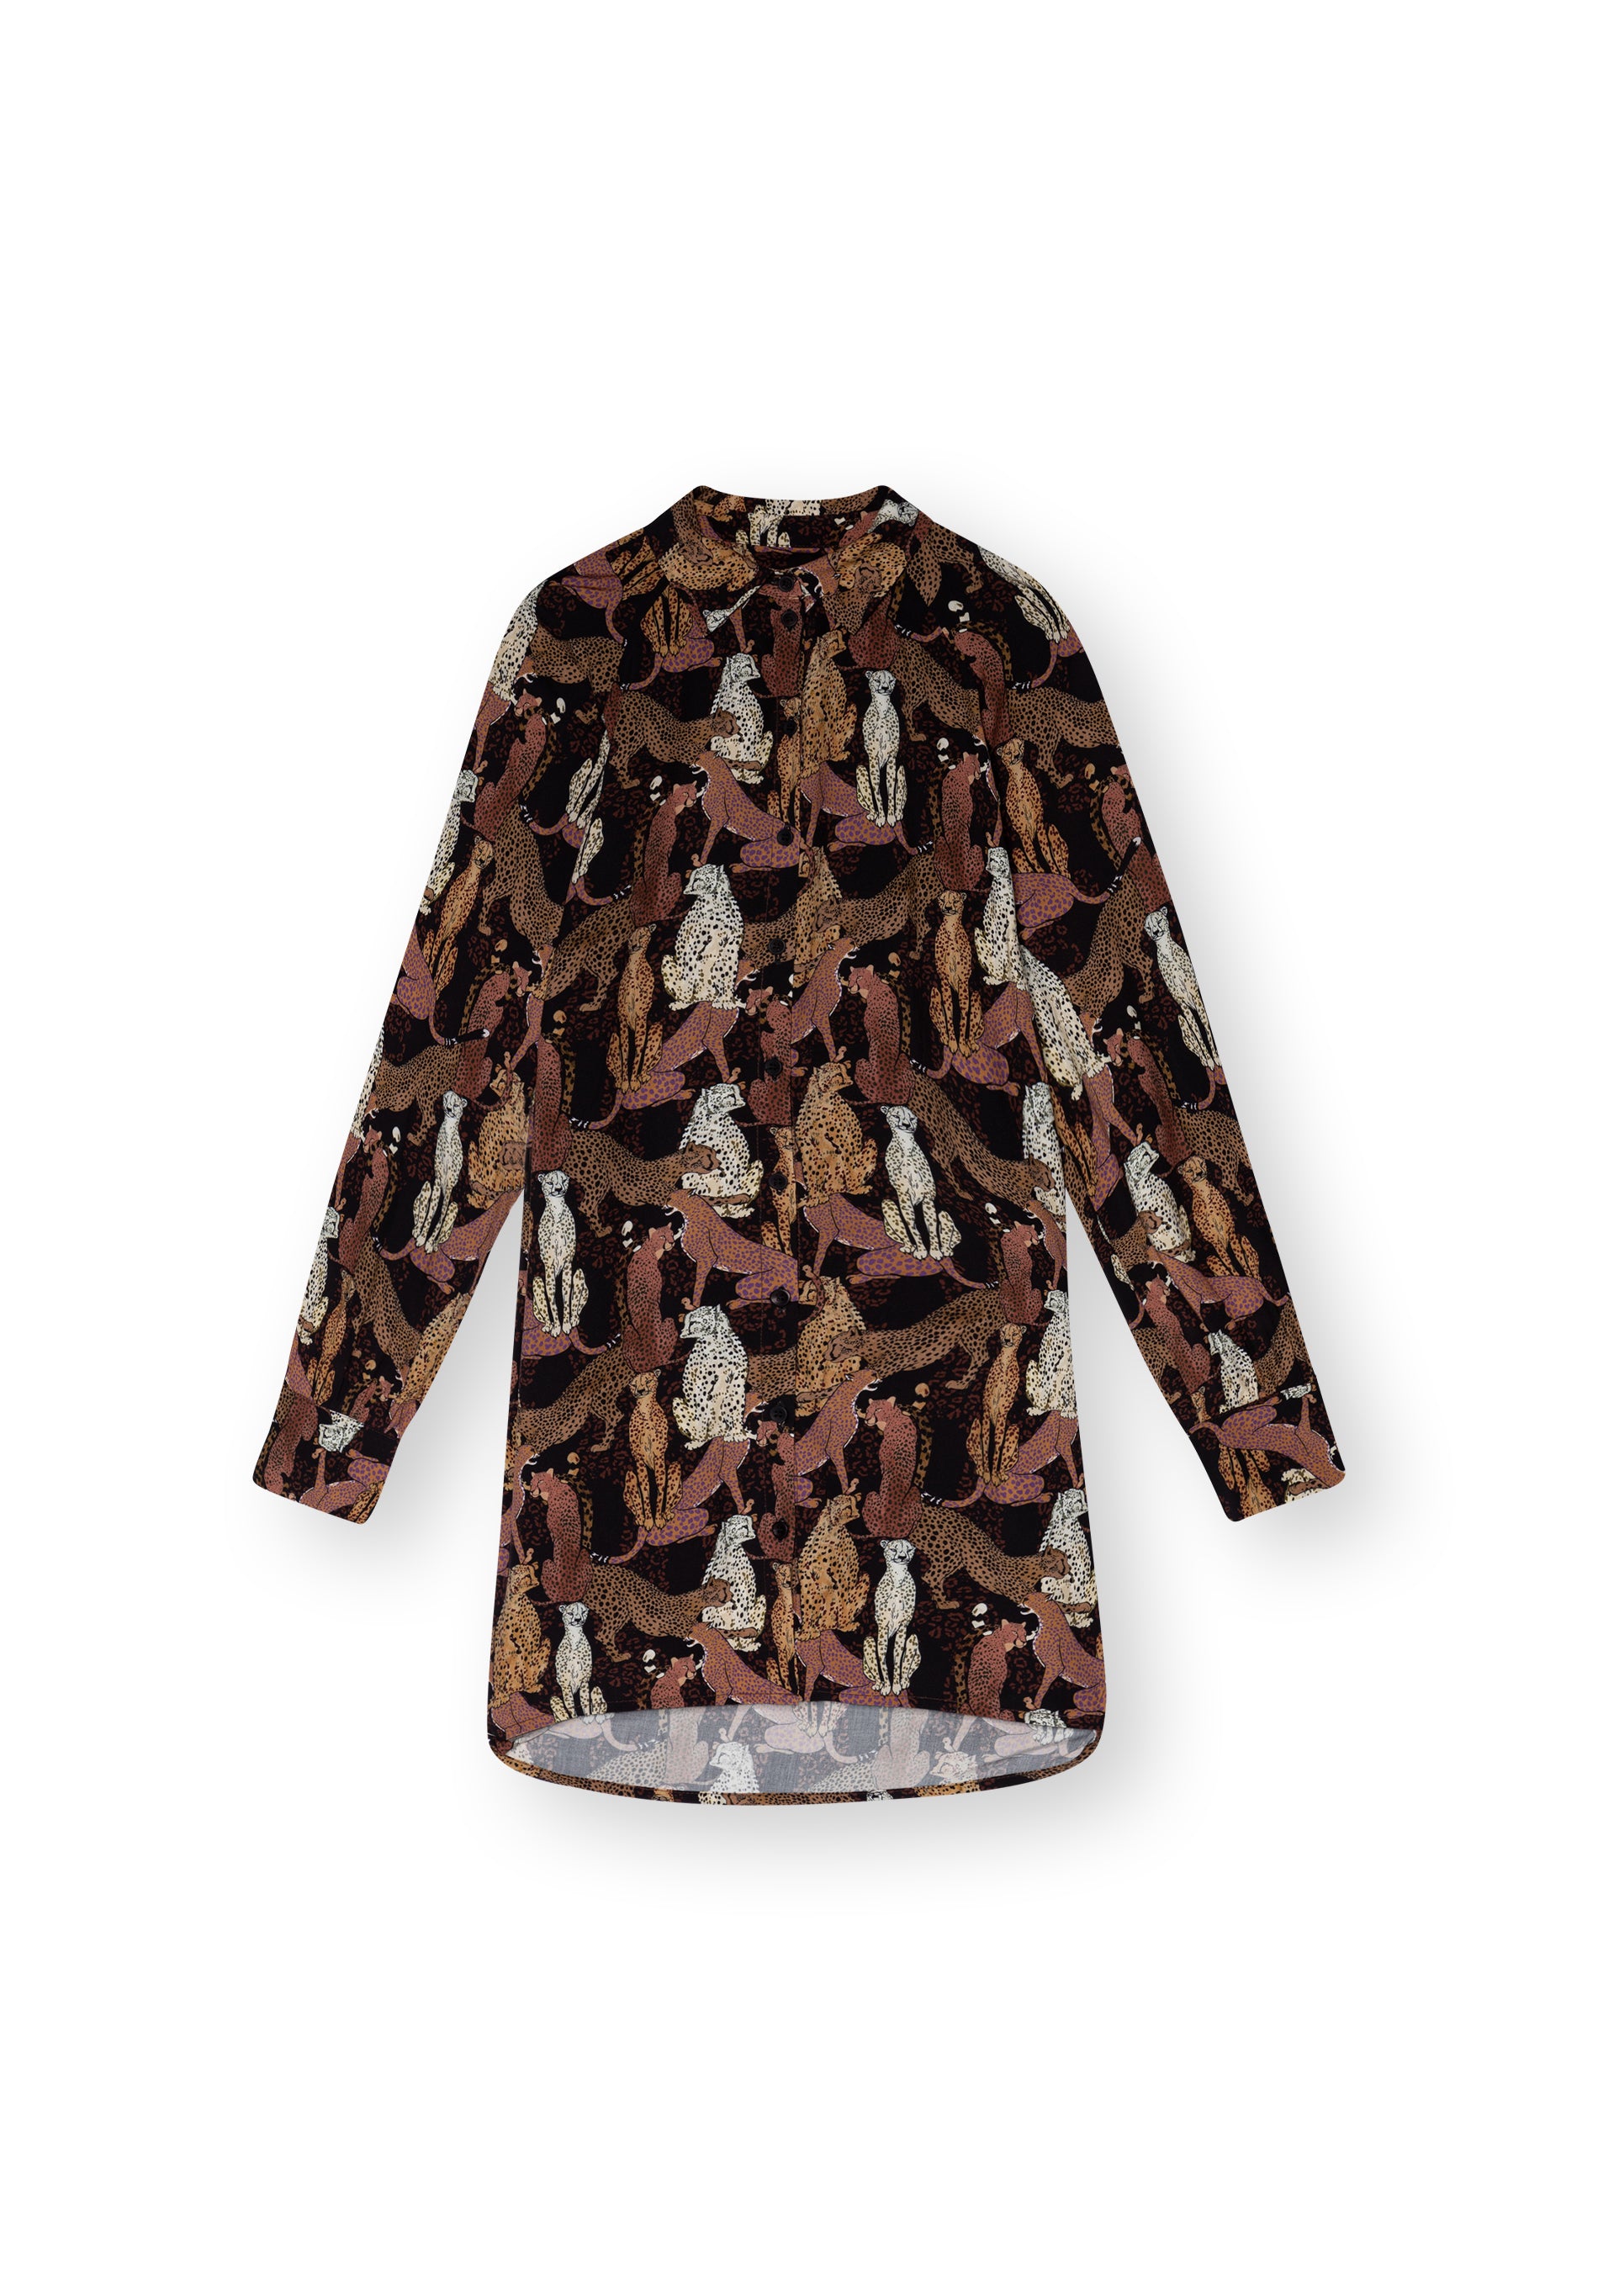 Long blouse TAPIRA in animal pattern by LOVJOI made from ECOVERO™